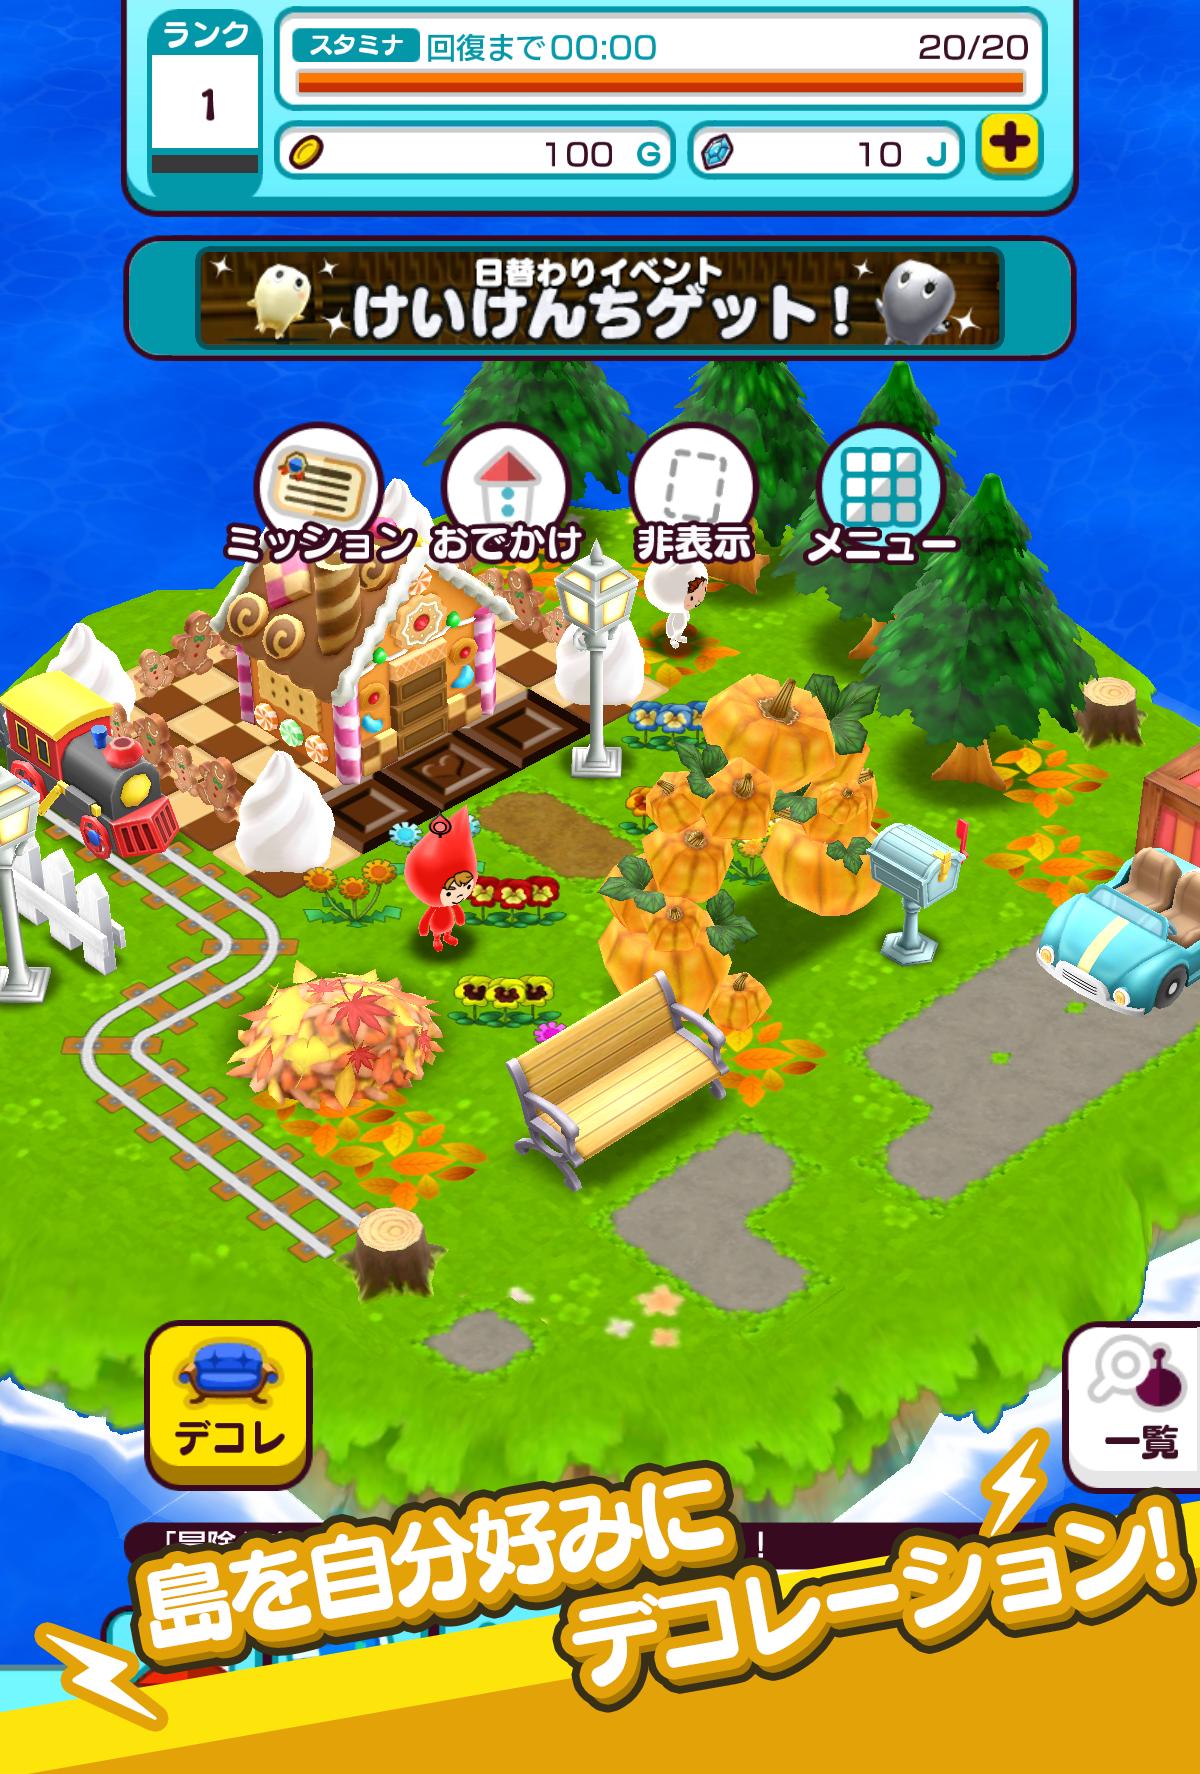 New 電波人間のrpg For Android Apk Download